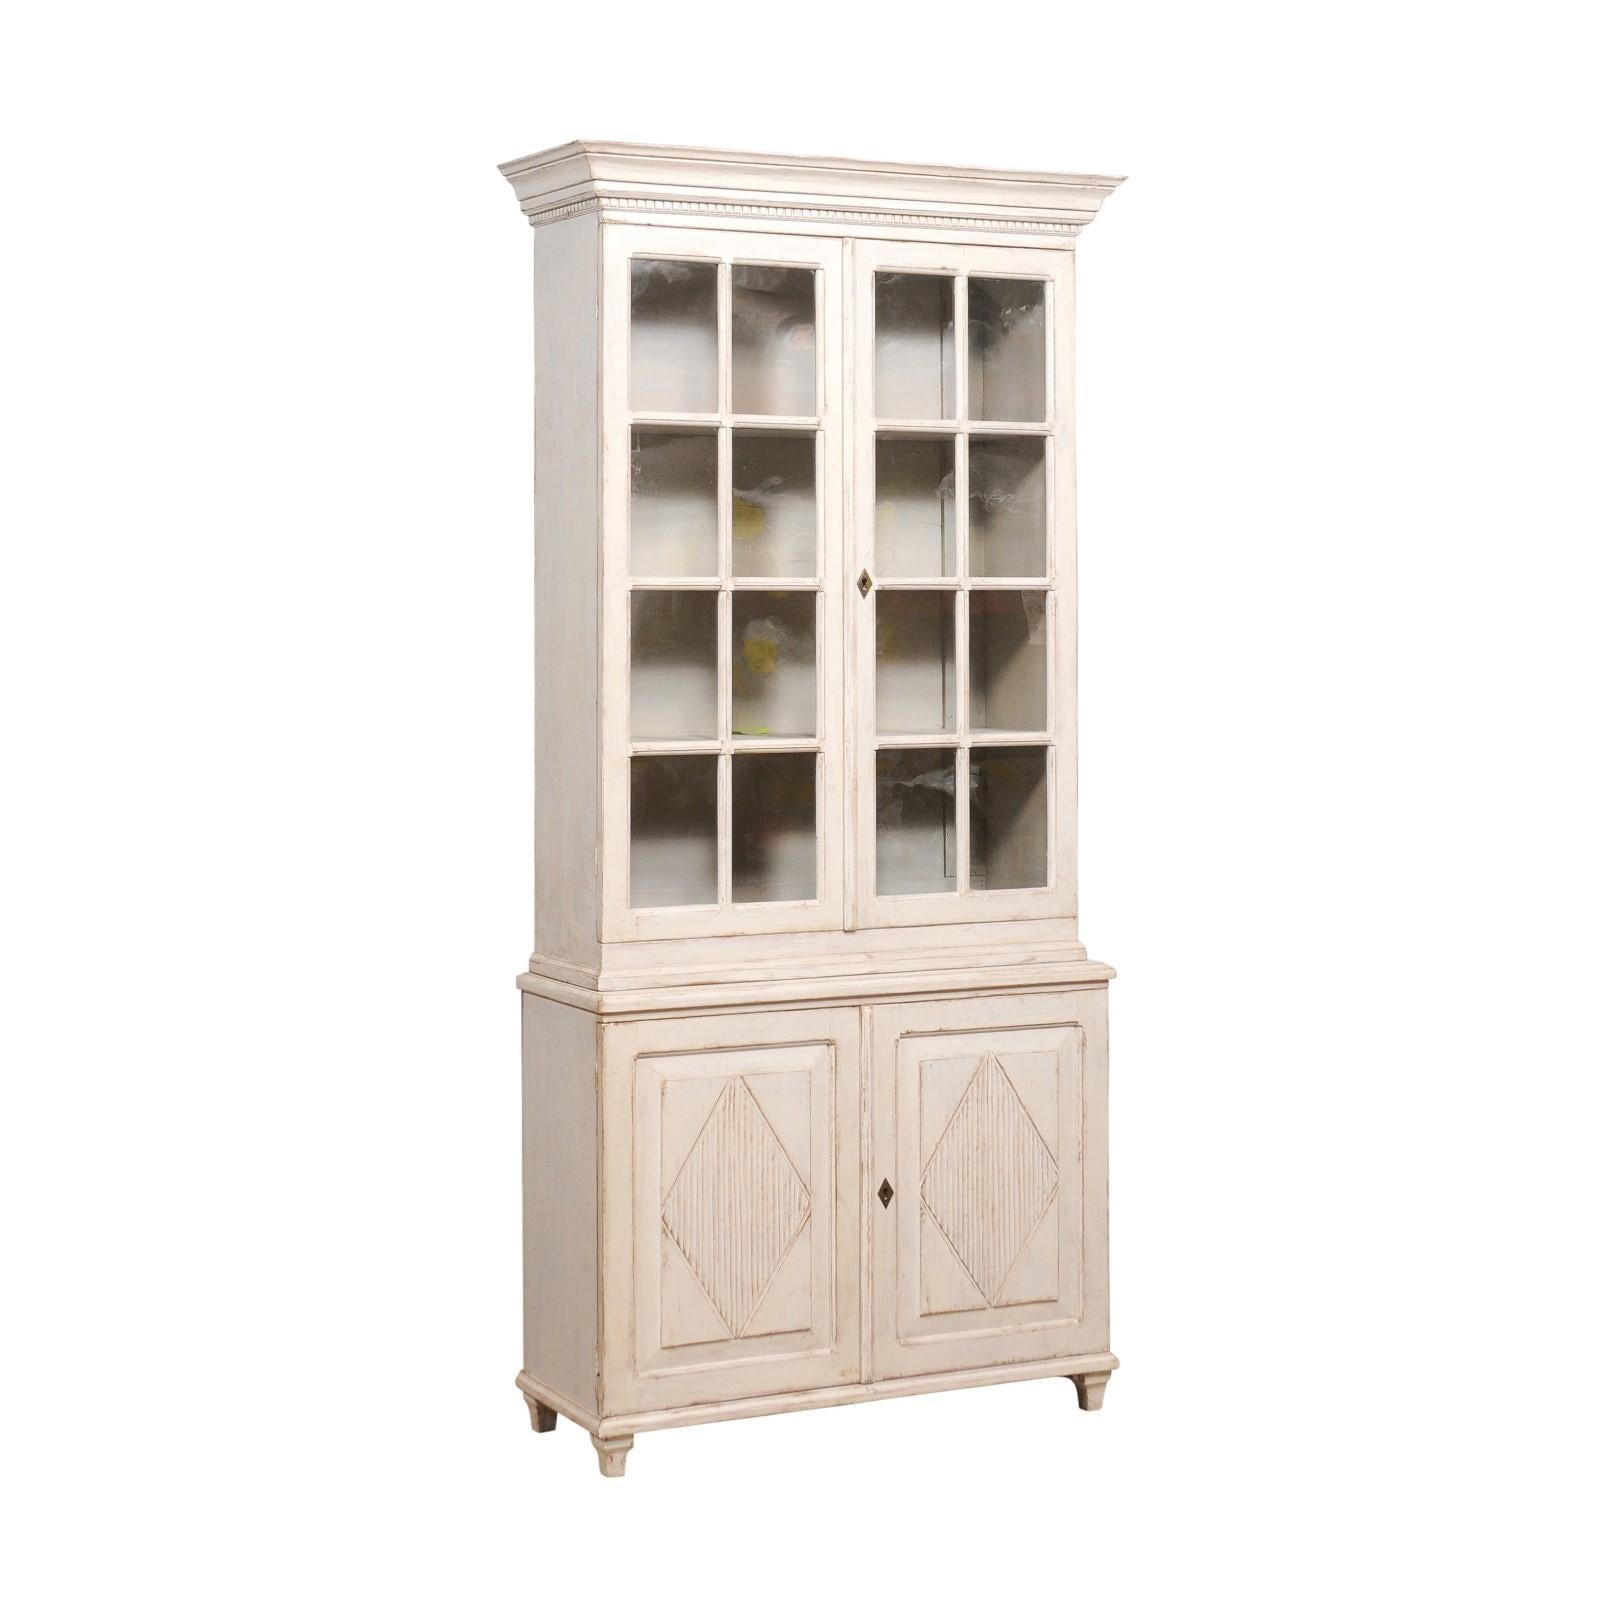 A Swedish Gustavian style painted wood vitrine cabinet from circa 1880 with light gray painted finish, glass doors and carved diamond motifs. This Swedish Gustavian style vitrine cabinet, hailing from the late 19th century, effortlessly marries